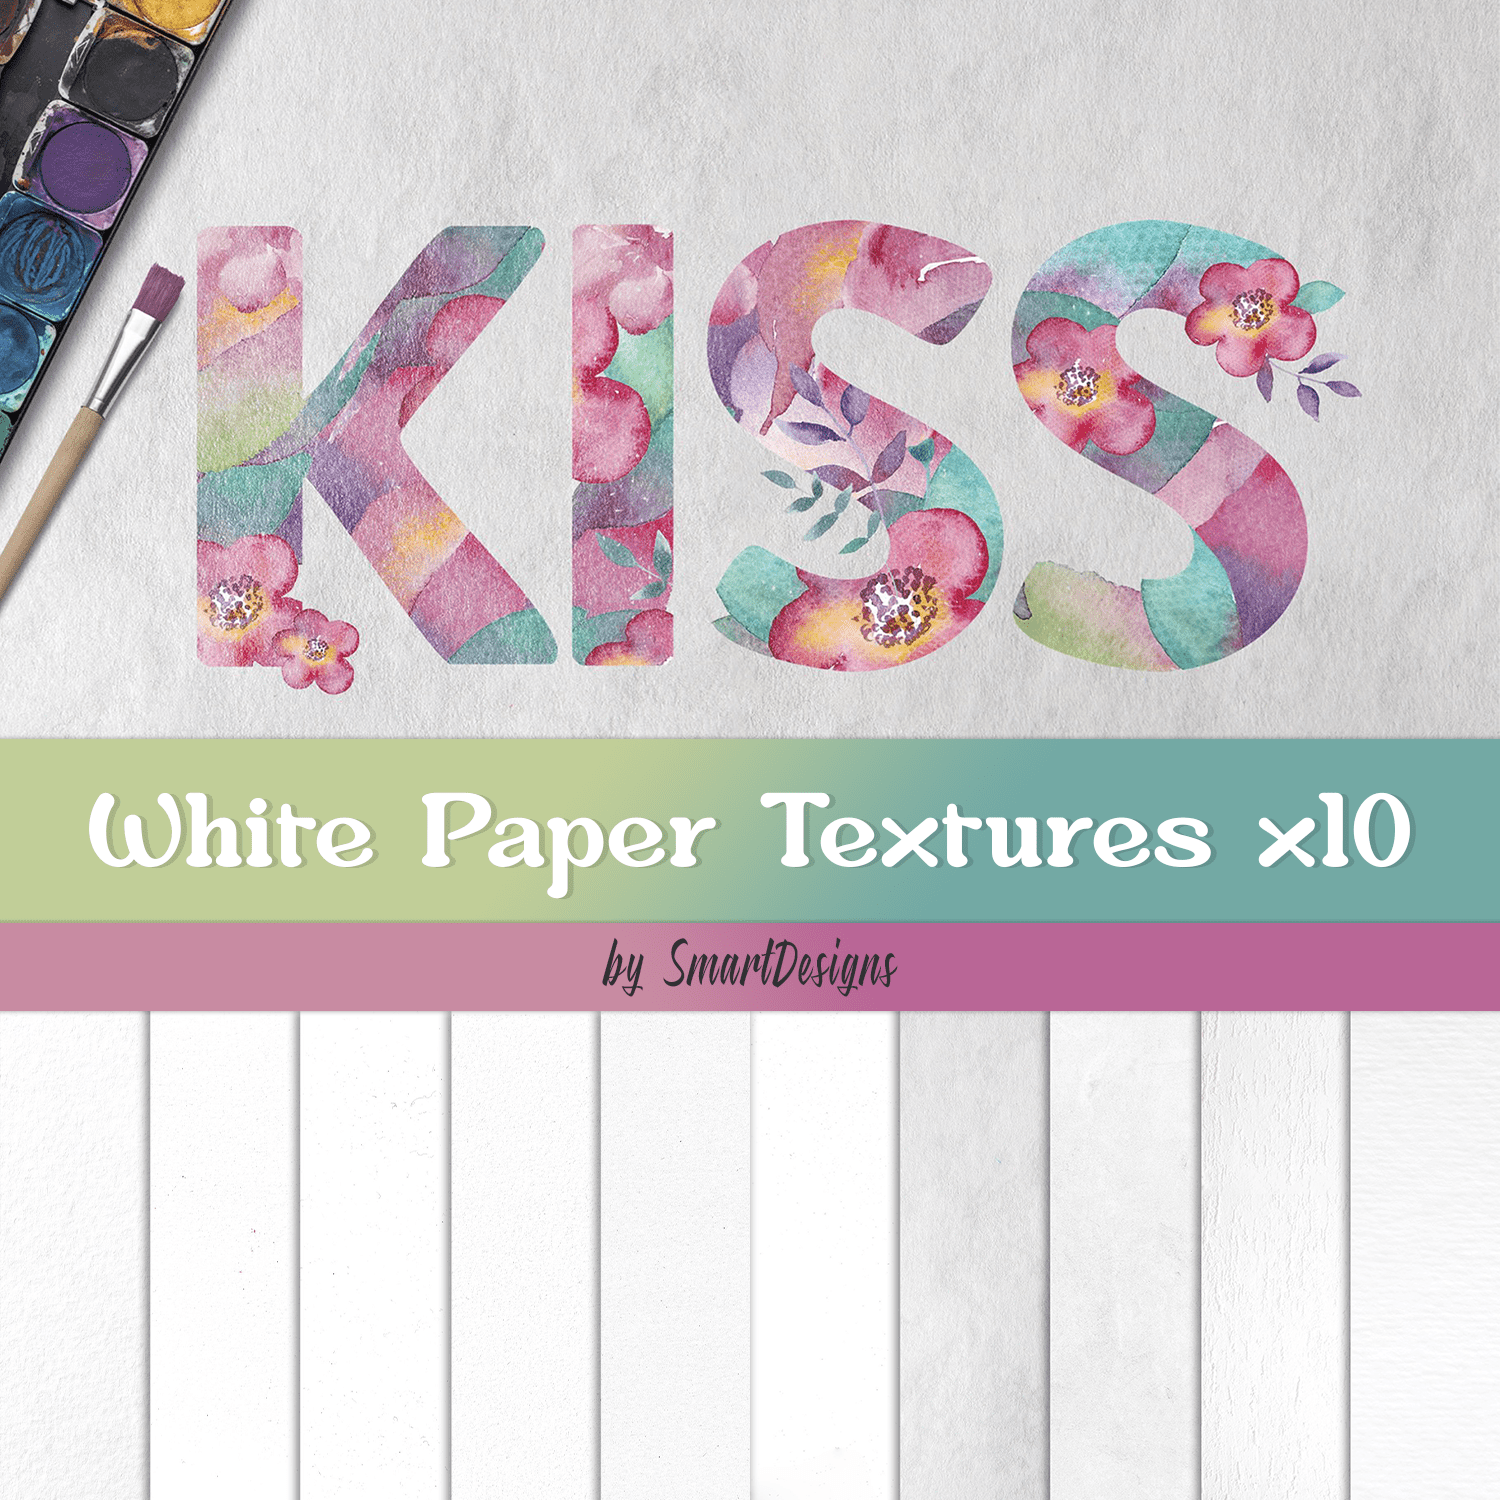 Preview white paper textures.